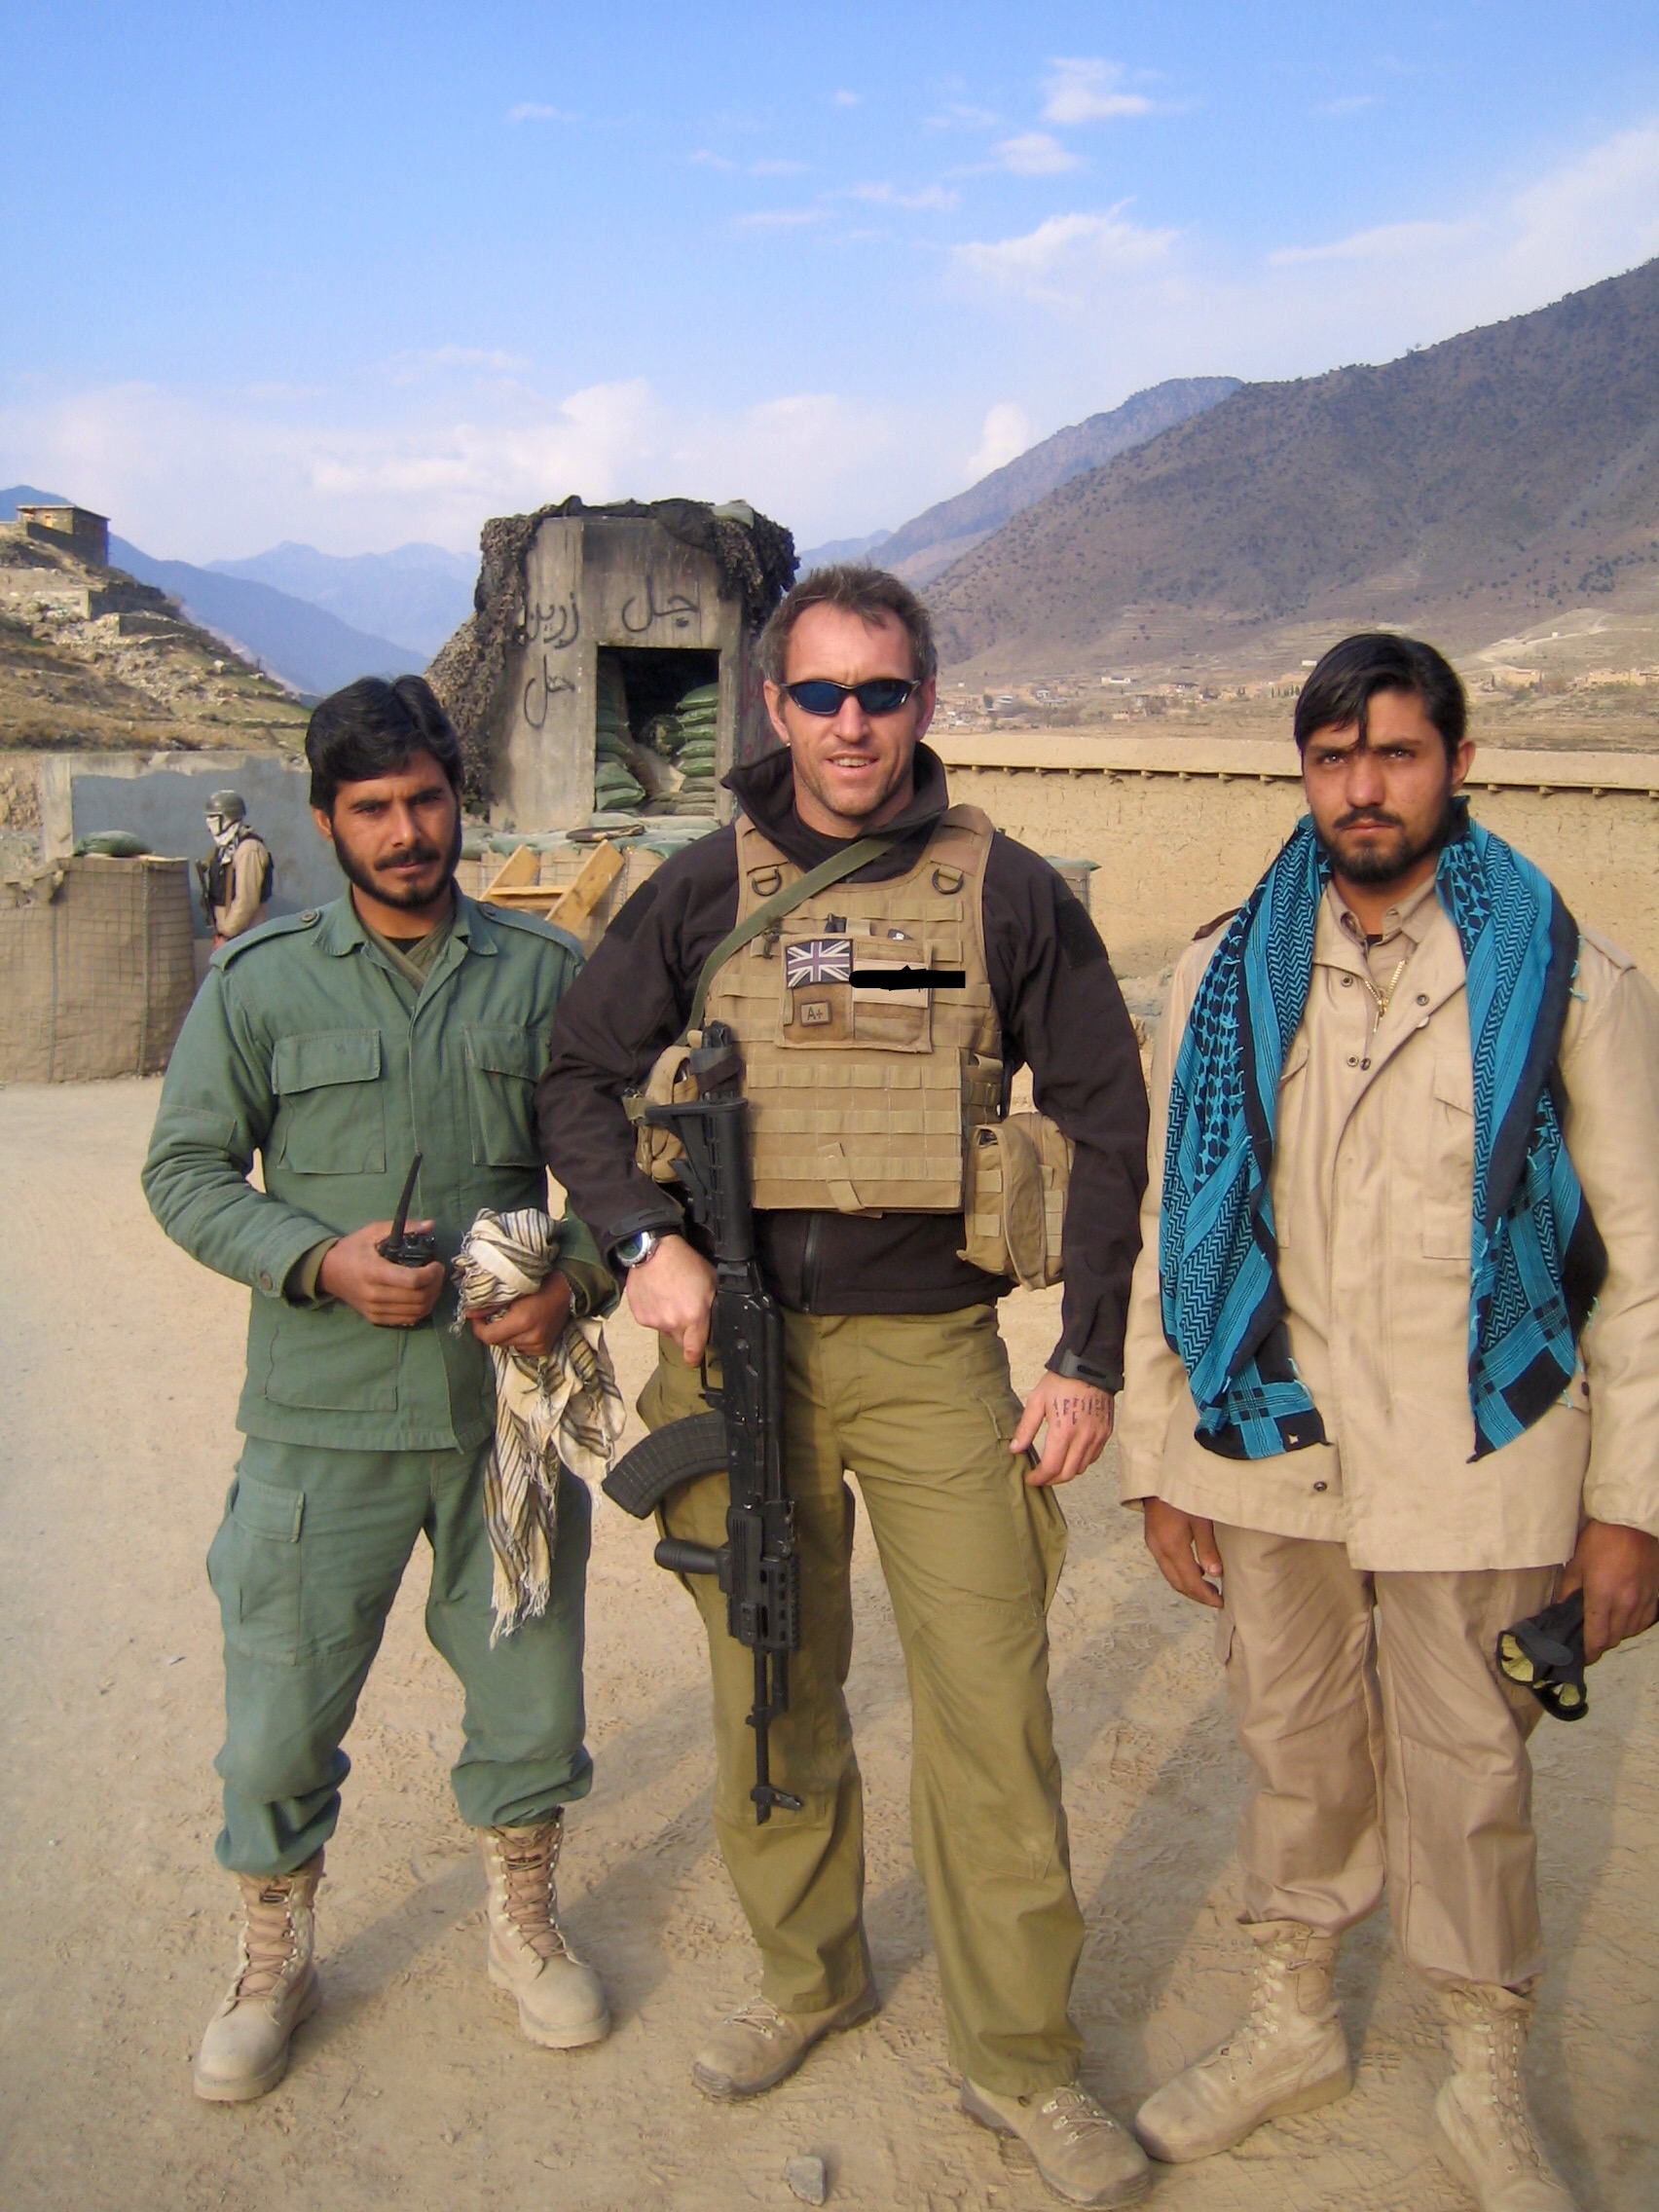 Ian in uniform with local military officers in Aghanistan